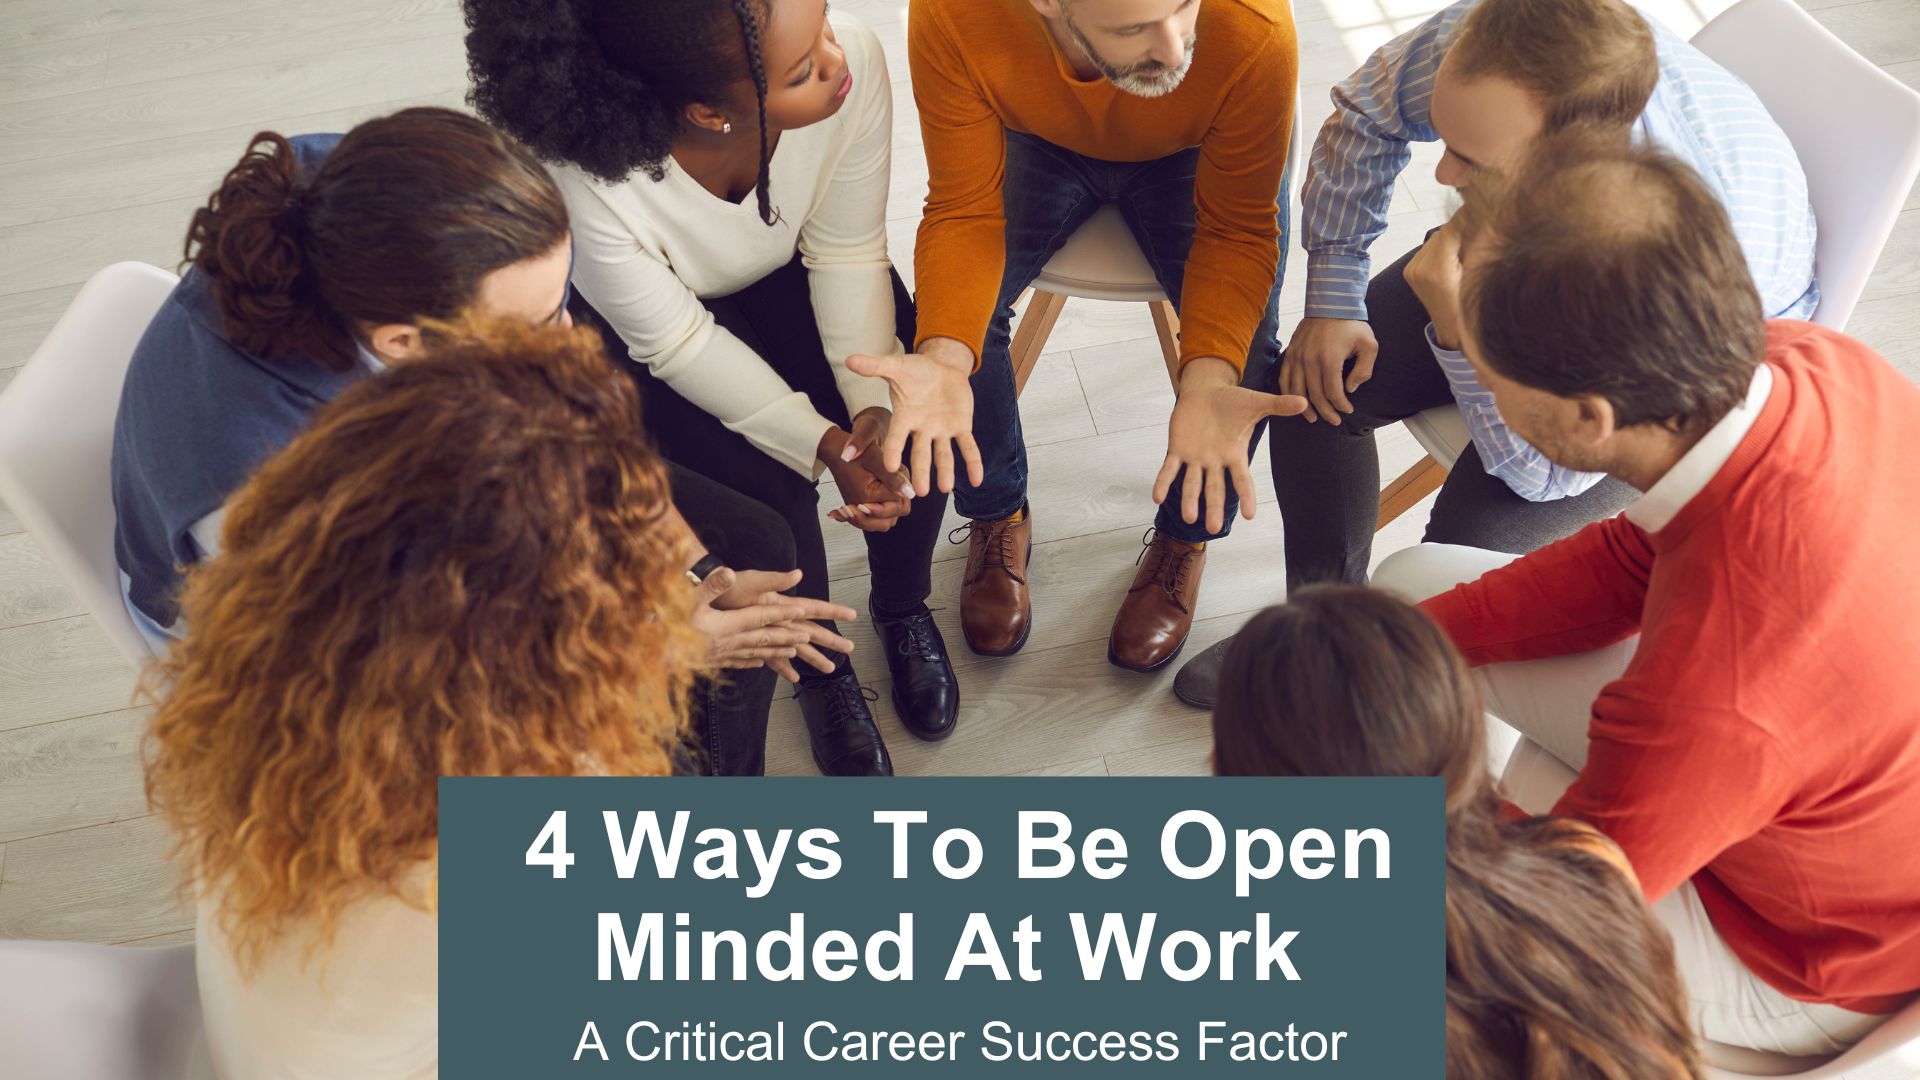 4 ways to be open minded at work - a critical career success factor